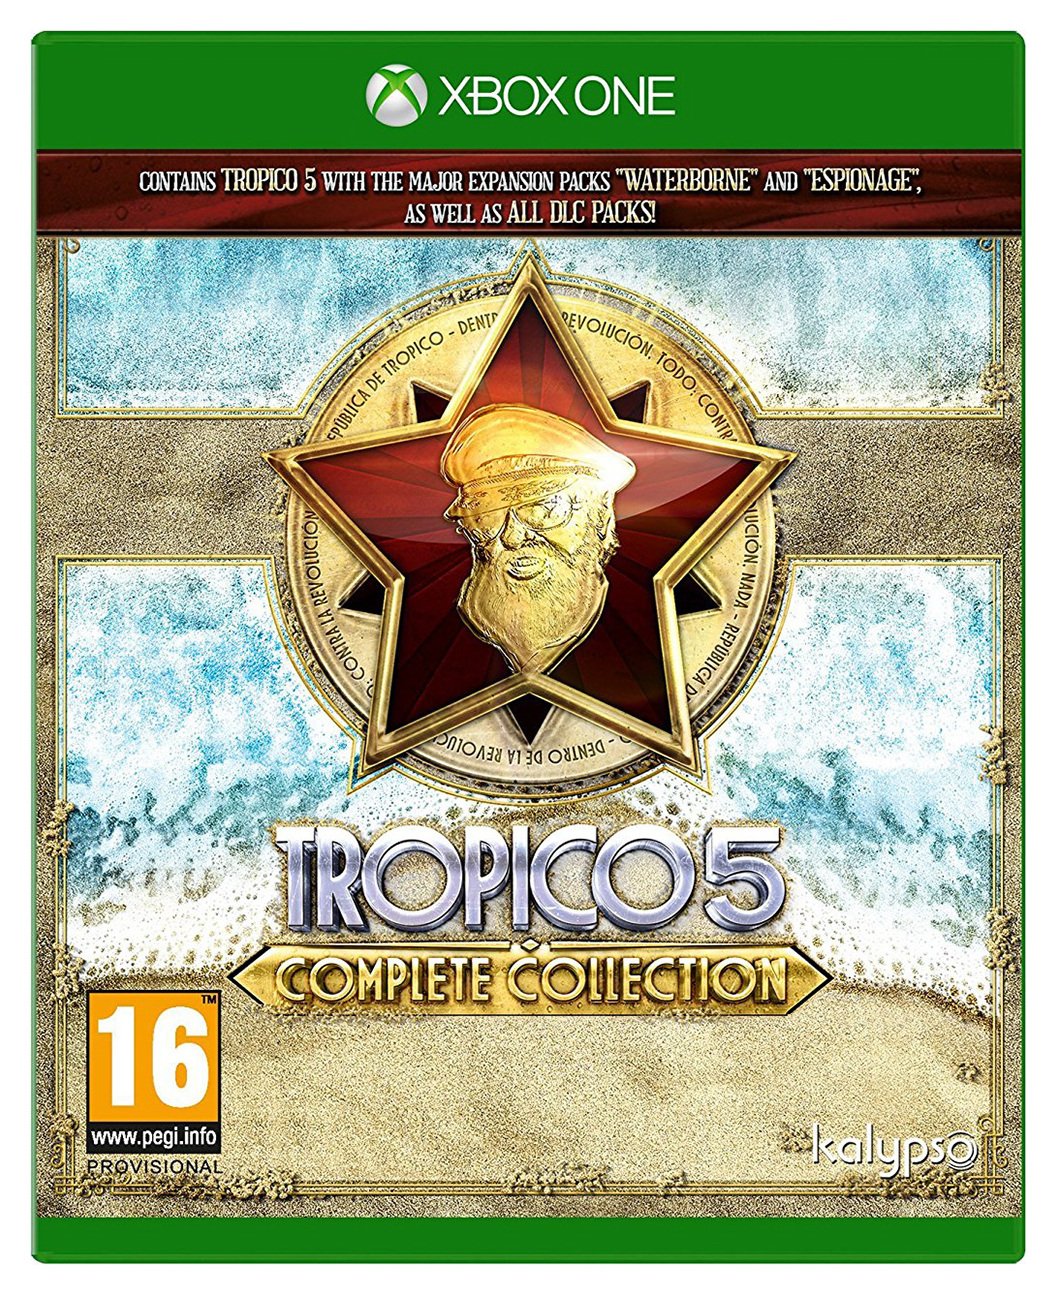 Tropico 5 Complete Collection Xbox One Game. Review